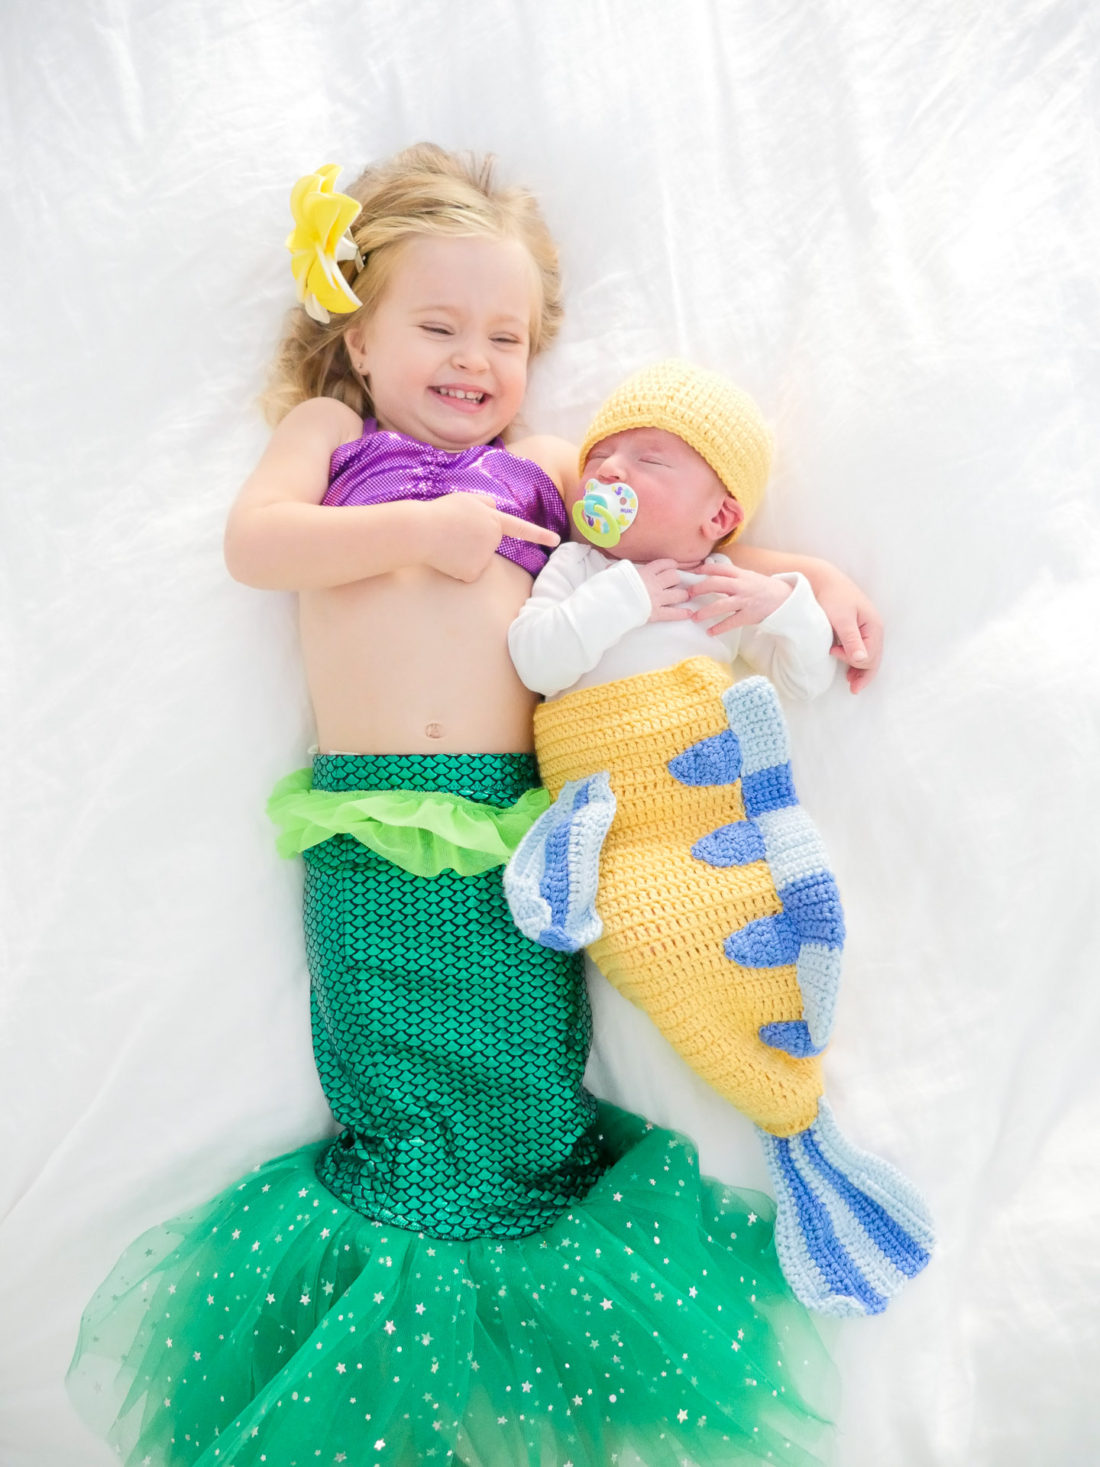 Marlowe Martino and Major Martino dressed as Ariel and Flounder from the Little Mermaid for Halloween